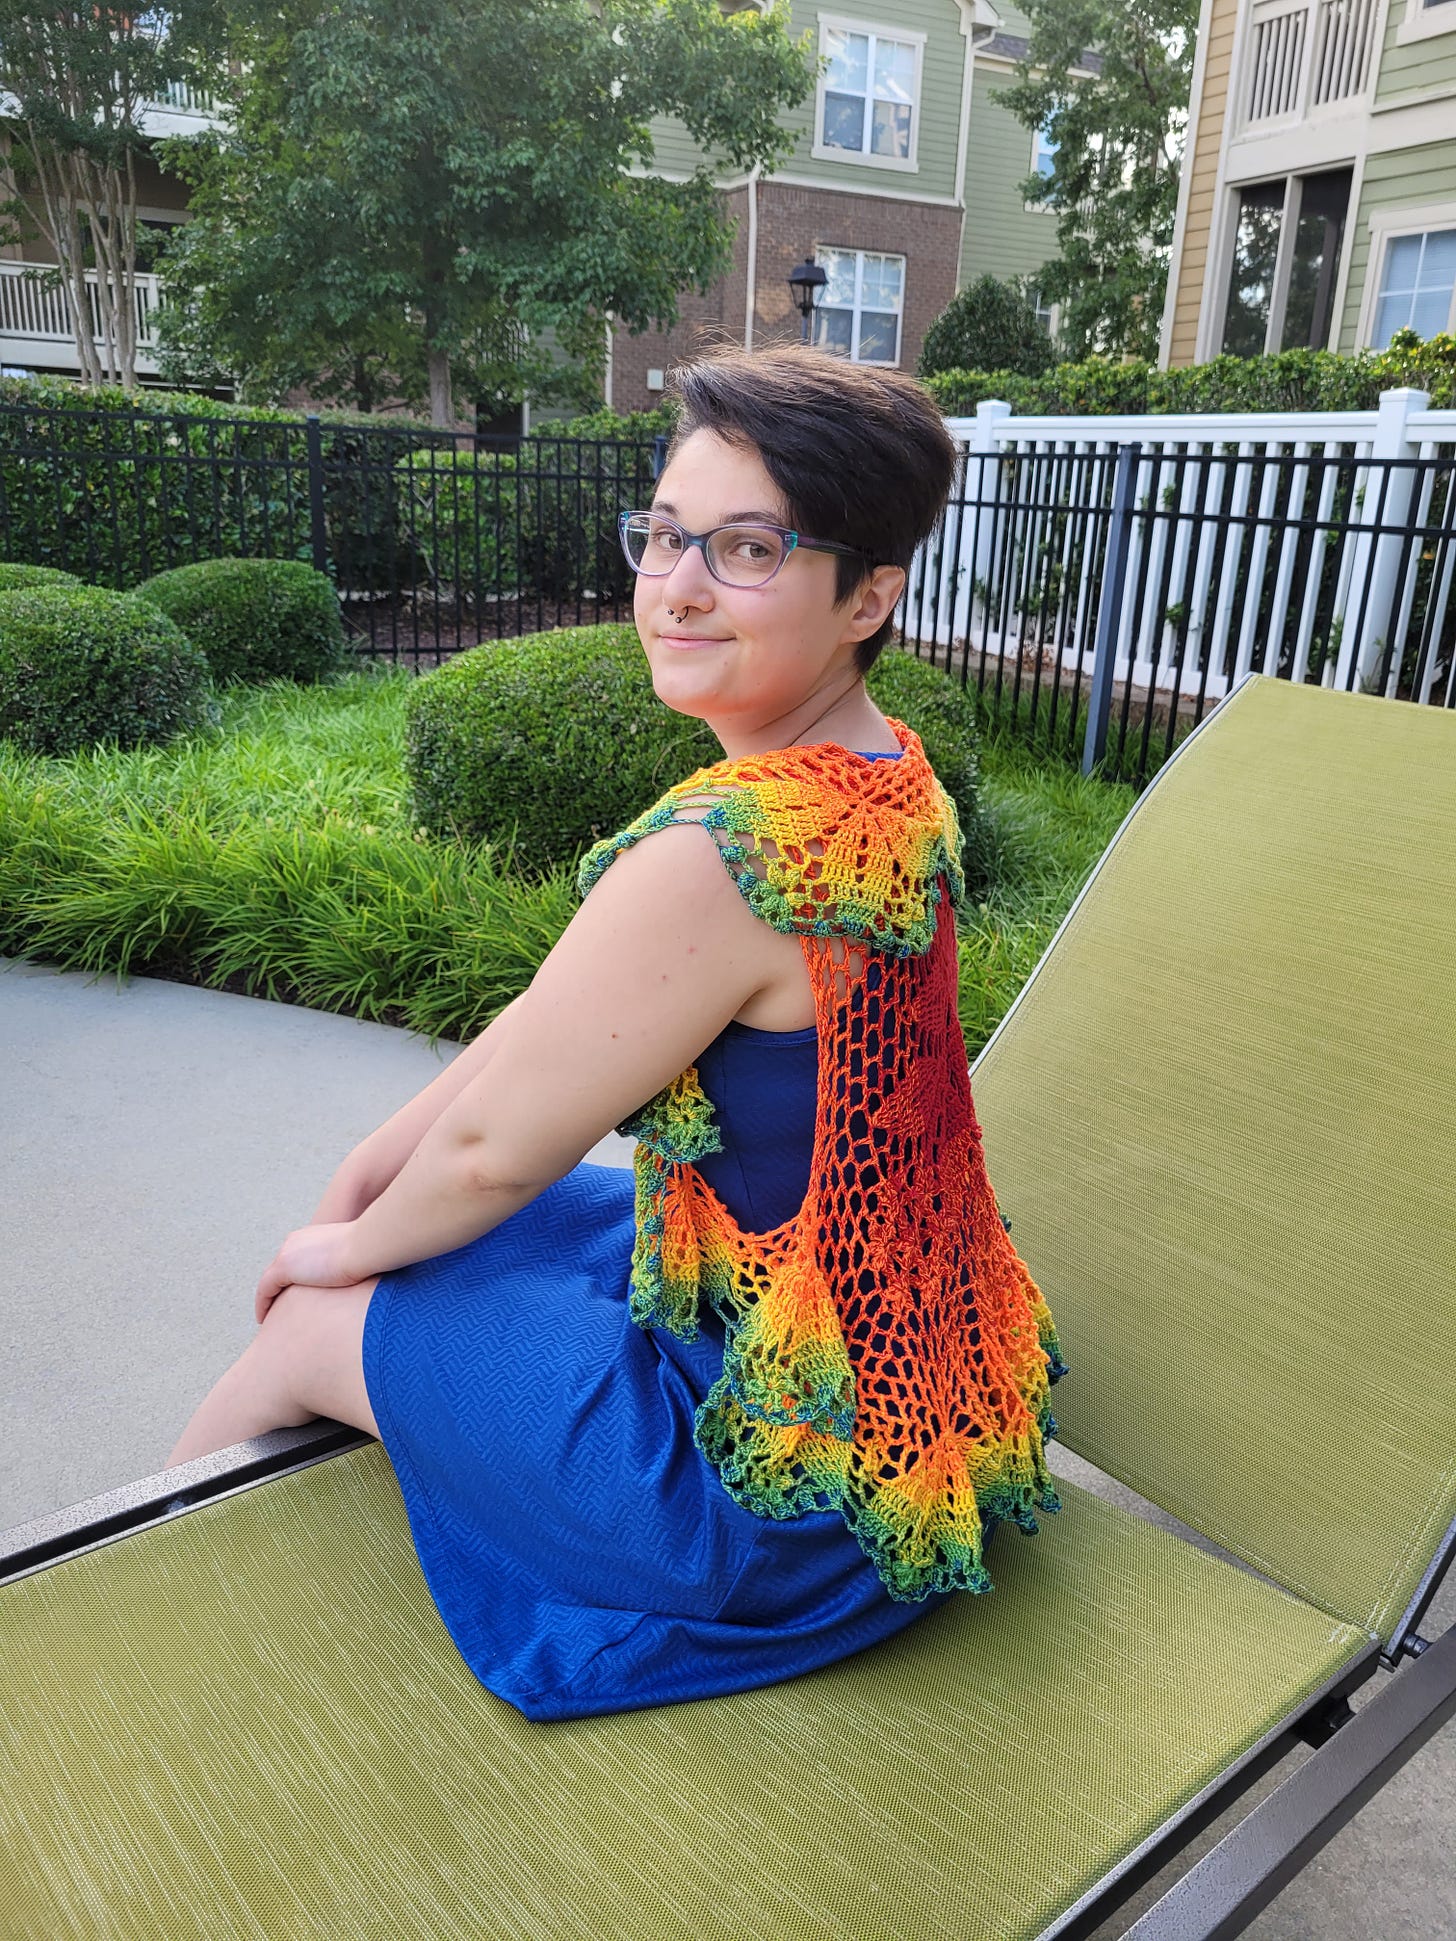 V "Kitty" wearing a handmade rainbow knit shawl sitting on a outdoor lounge chair.